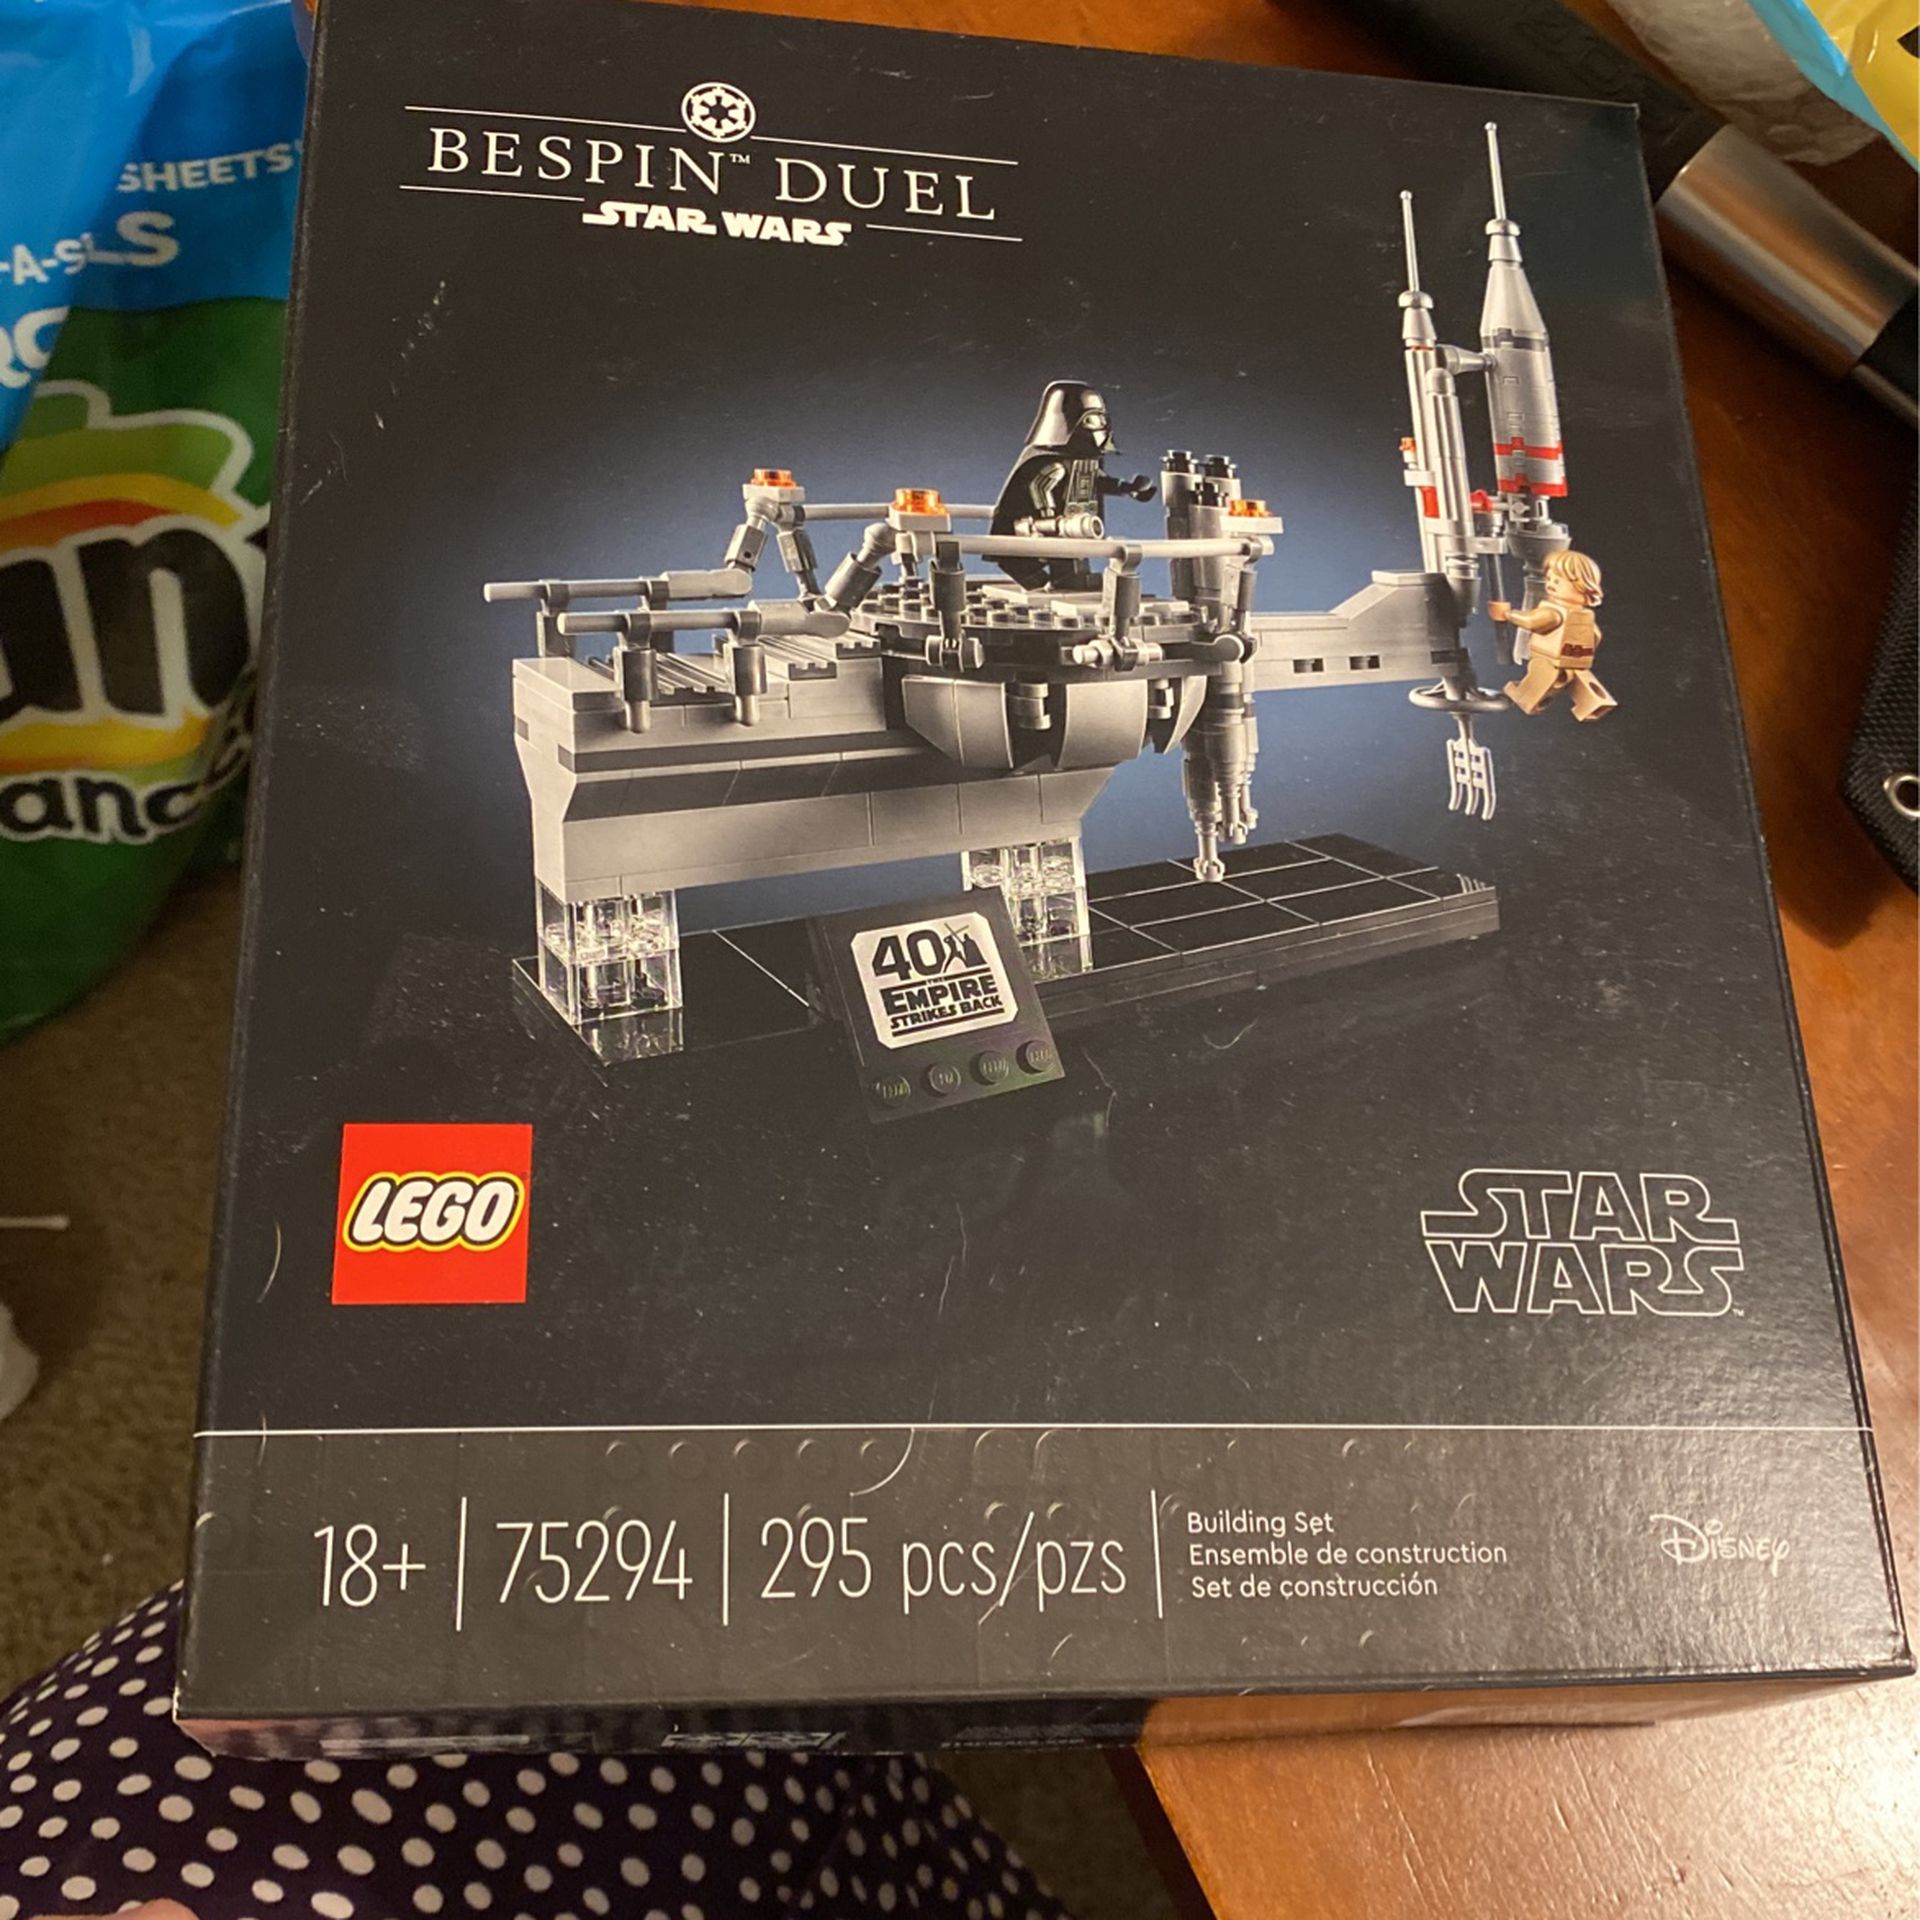 LEGO Star Wars Bespin Duel Sealed Retired 